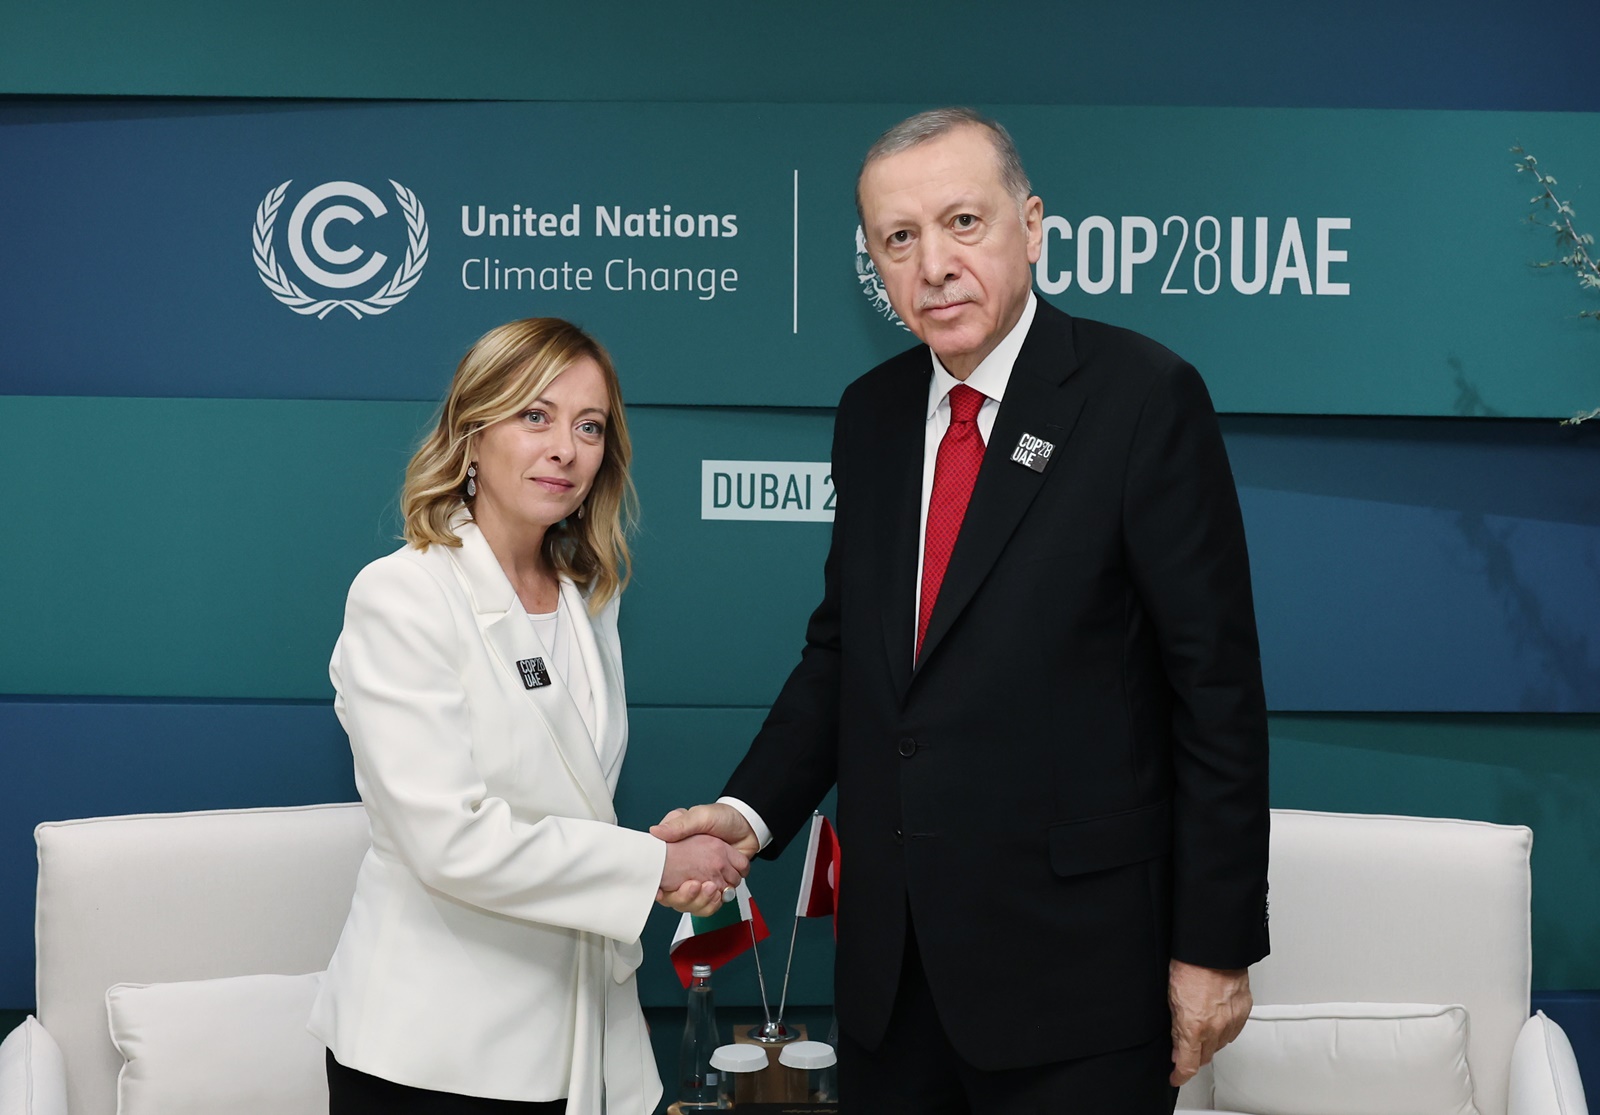 epa11005789 A handout photo made available by Turkish Presidential Press office shows Turkish President Recep Tayyip Erdogan (R) and  Italian Prime Minister Giorgia Meloni during their meeting at the UN Climate Change Conference COP28, in Dubai, United Arab Emirates, 01 December 2023. The 2023 United Nations Climate Change Conference (COP28), runs from 30 November to 12 December, and is expected to host one of the largest number of participants in the annual global climate conference as over 70,000 estimated attendees, including the member states of the UN Framework Convention on Climate Change (UNFCCC), business leaders, young people, climate scientists, Indigenous Peoples and other relevant stakeholders will attend. HANDOUT EDITORIAL USE ONLY/NO SALES  EPA/MURAT CETINMUHURDAR /TURKISH PRESIDENTIAL PRESS OFFICE /HANDOUT  HANDOUT EDITORIAL USE ONLY/NO SALES HANDOUT EDITORIAL USE ONLY/NO SALES